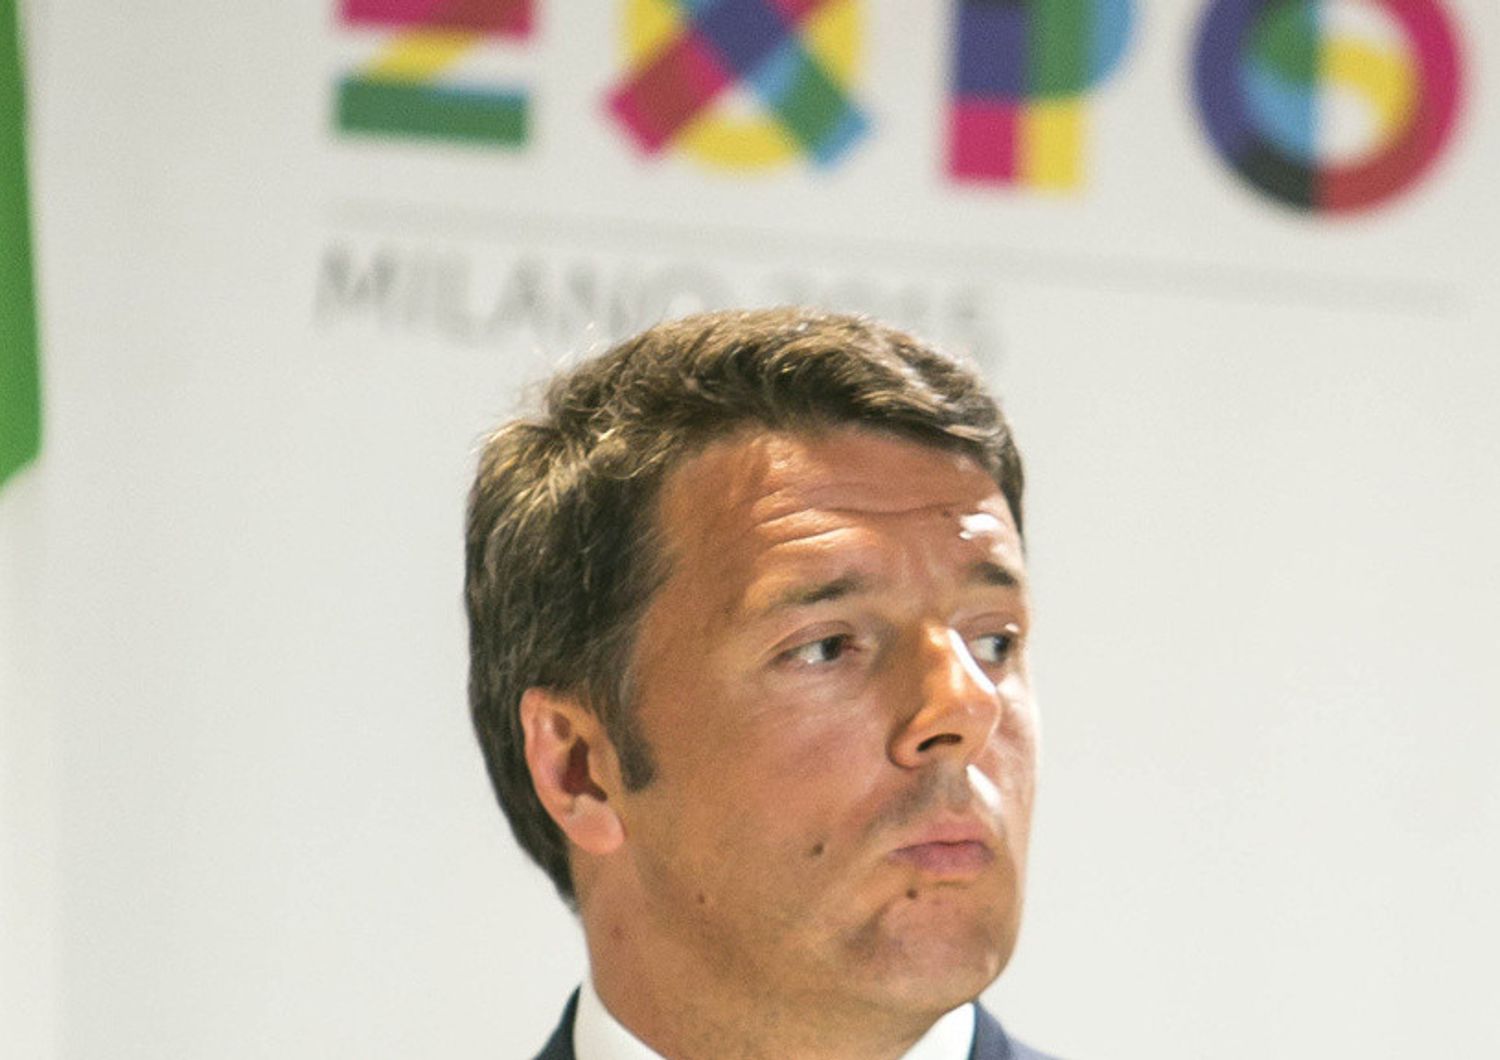 Prime Minister Renzi to attend Milan Expo on Tuesday